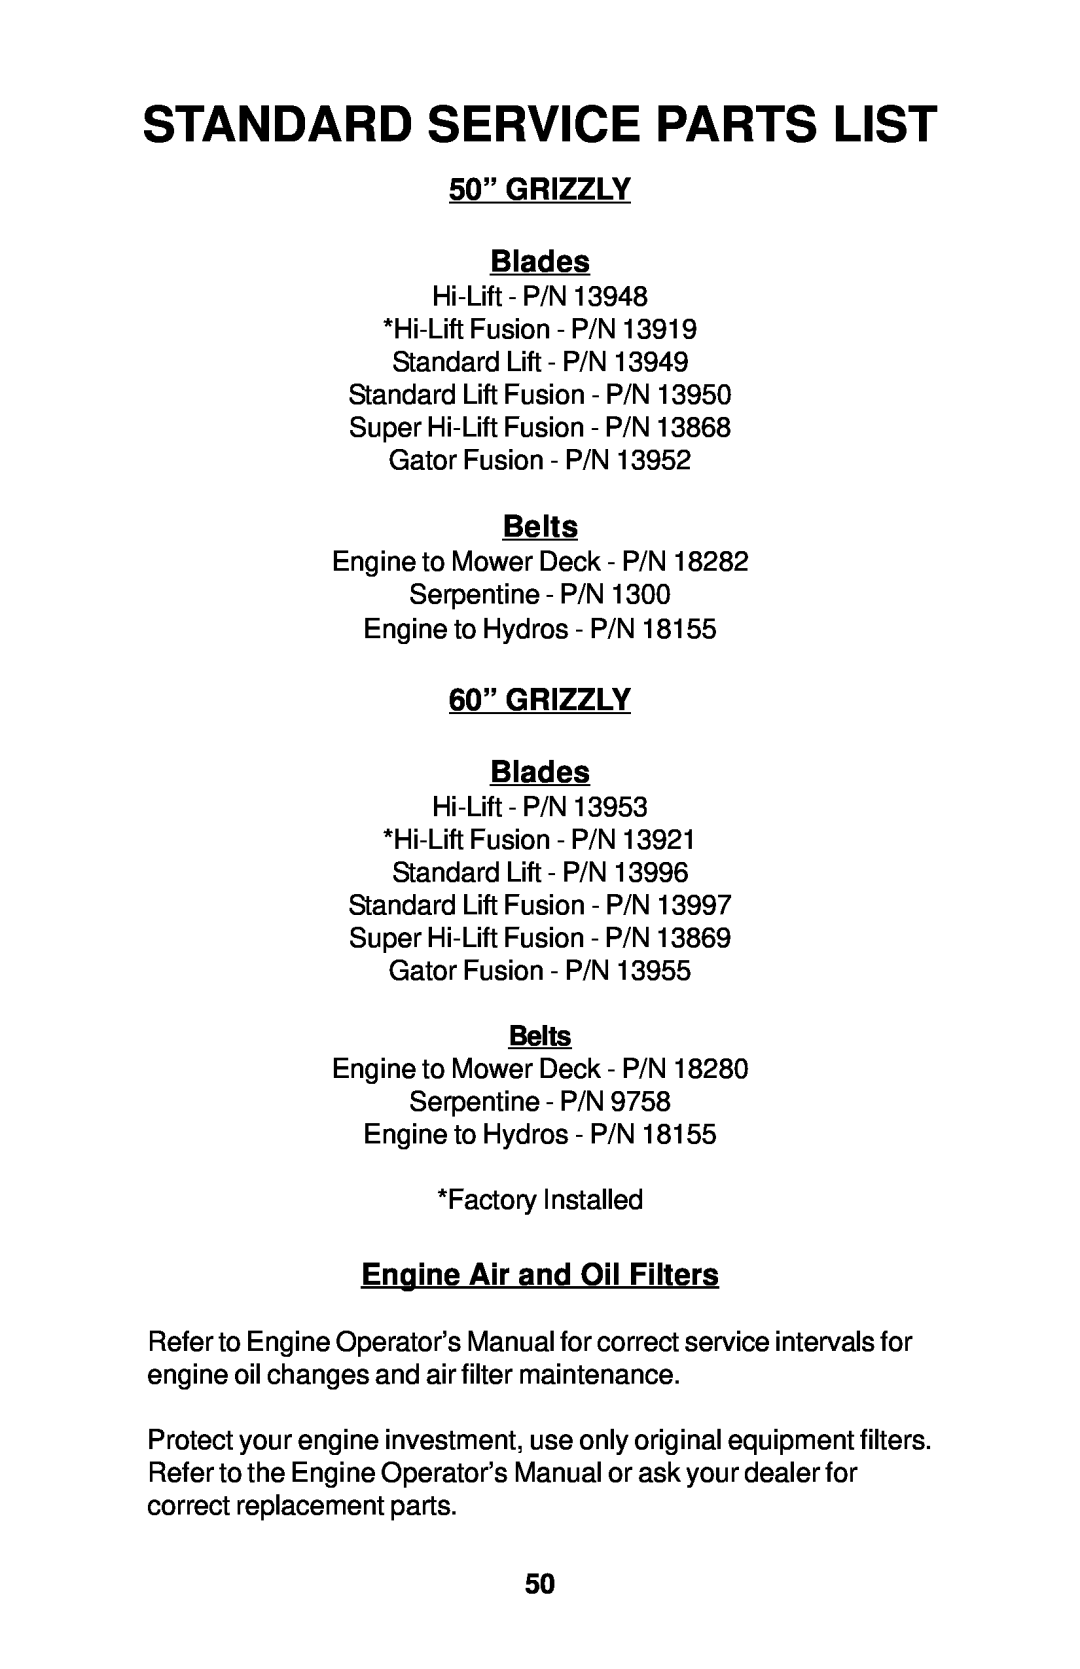 Dixon 18134-1004 Standard Service Parts List, 50” GRIZZLY Blades, Belts, 60” GRIZZLY Blades, Engine Air and Oil Filters 